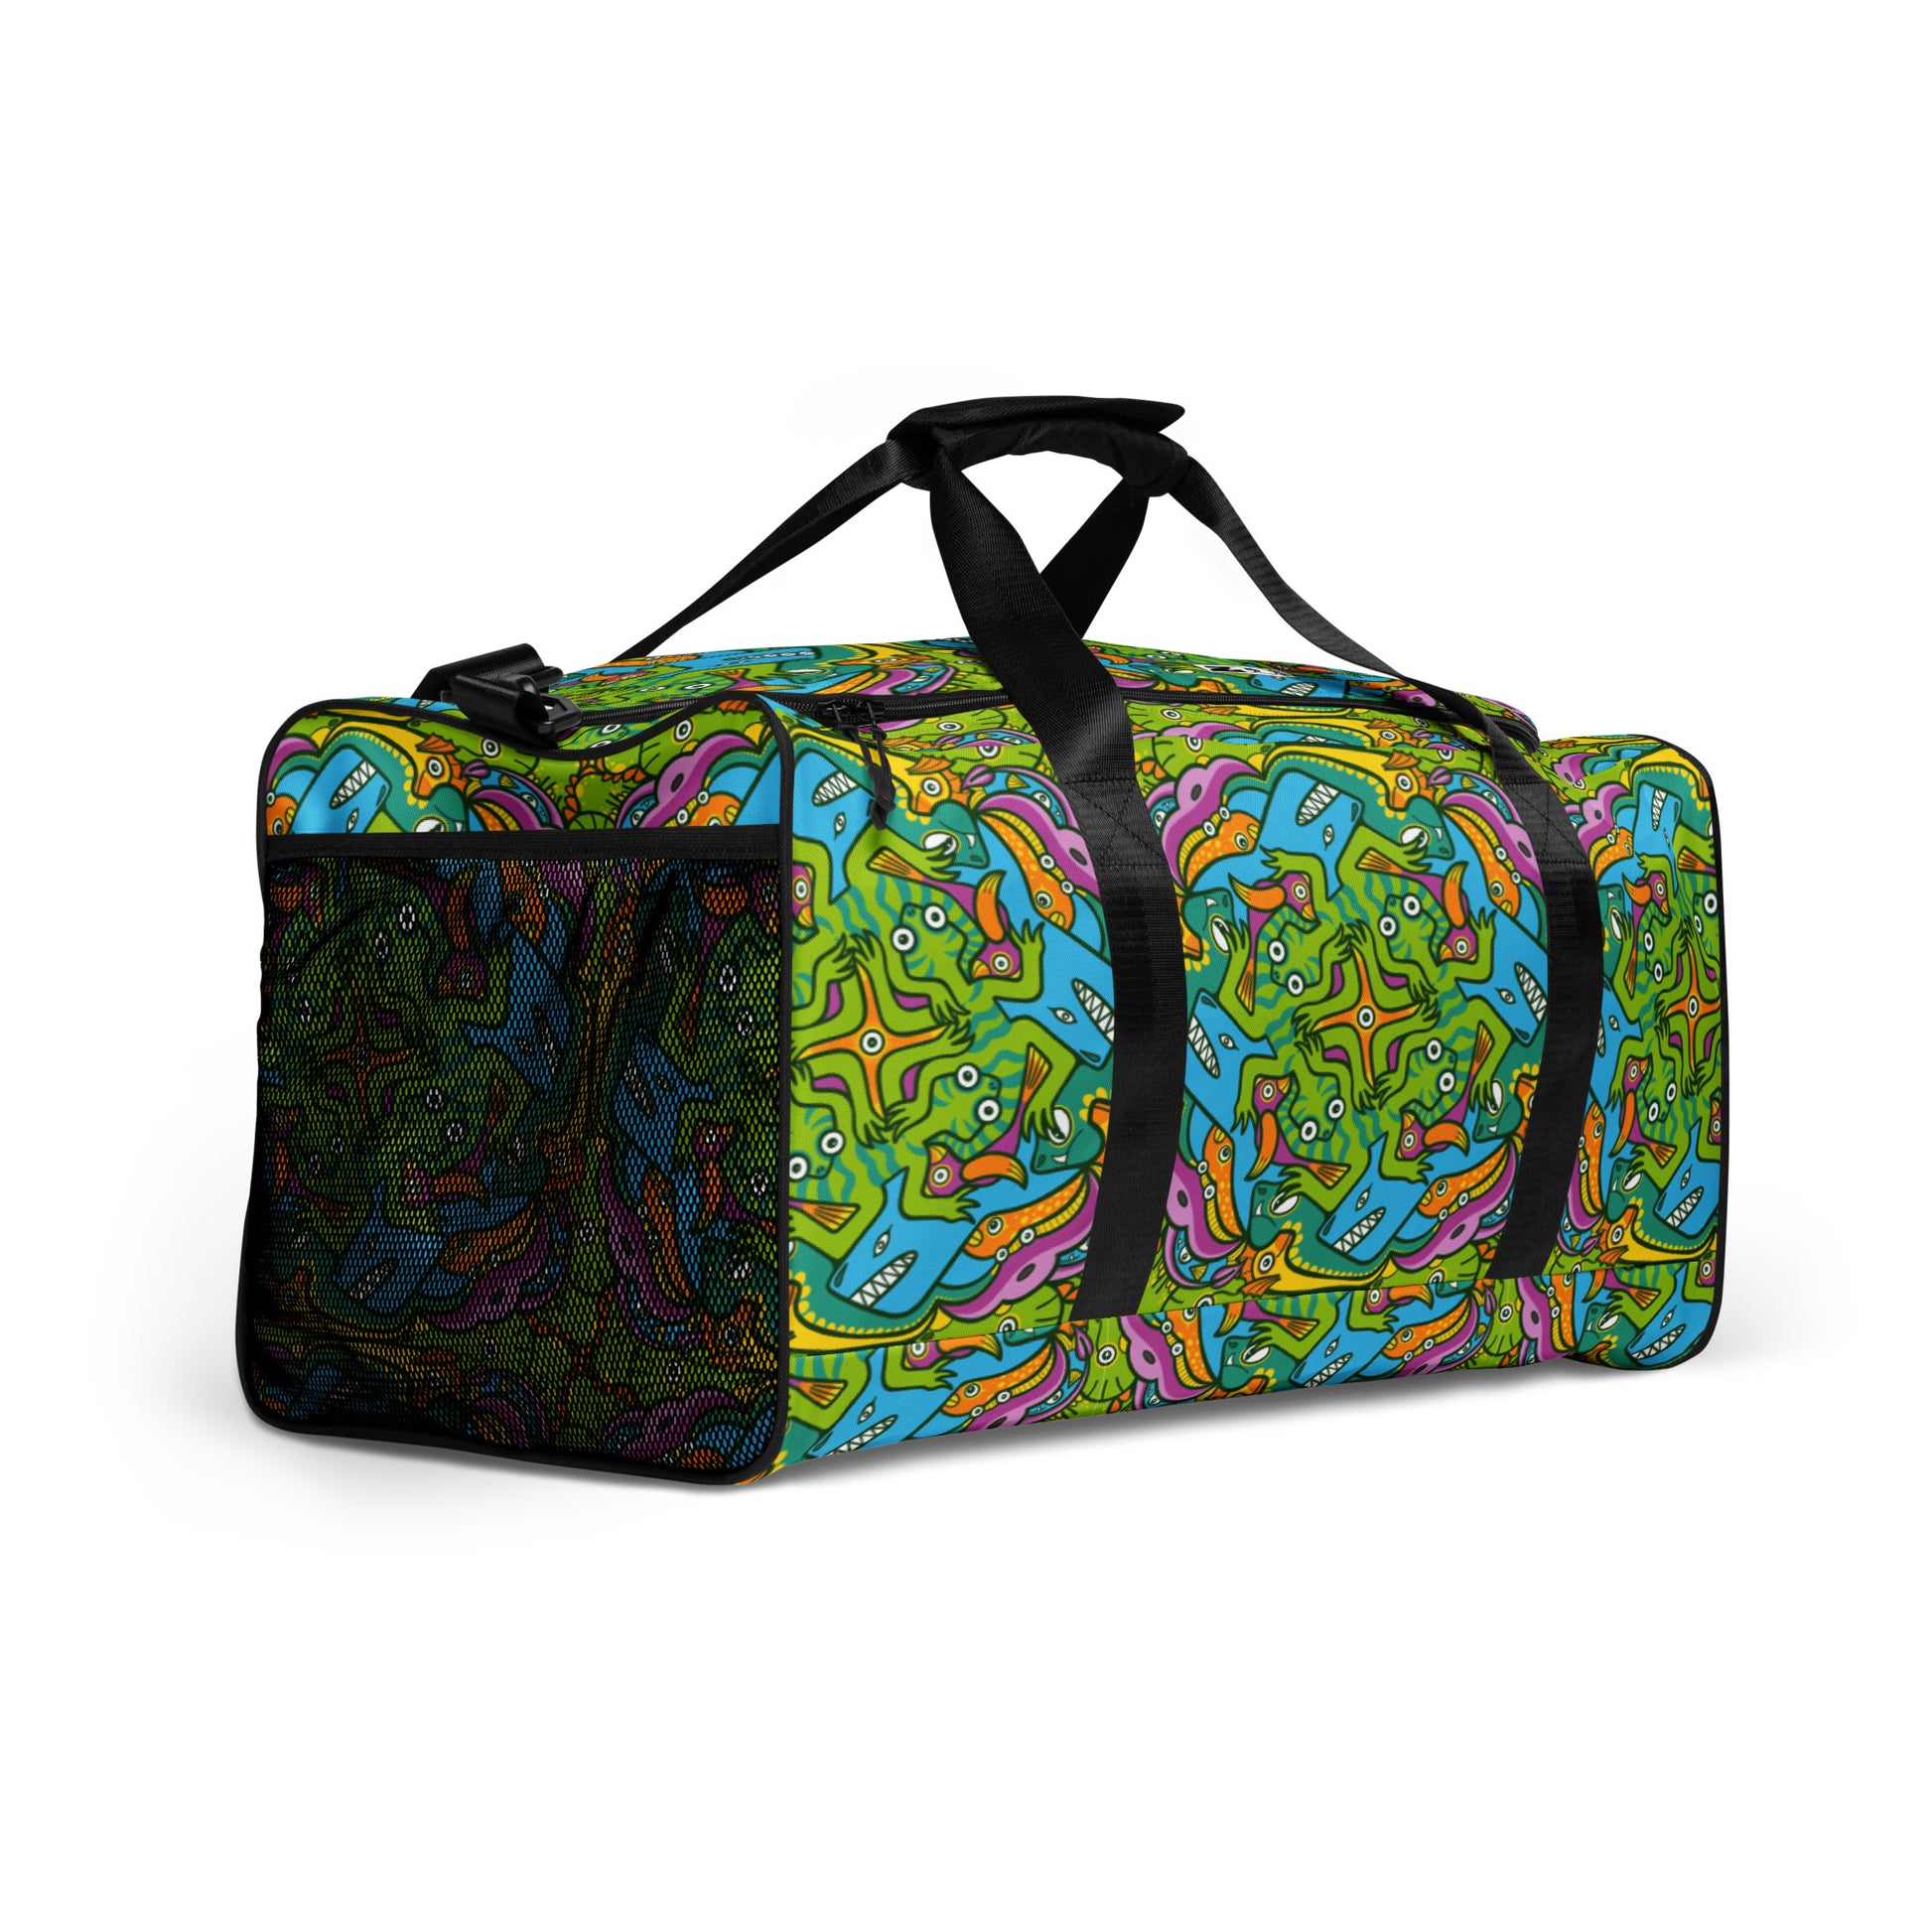 Keep calm and doodle is more than just doodling Duffle bag. Right front view